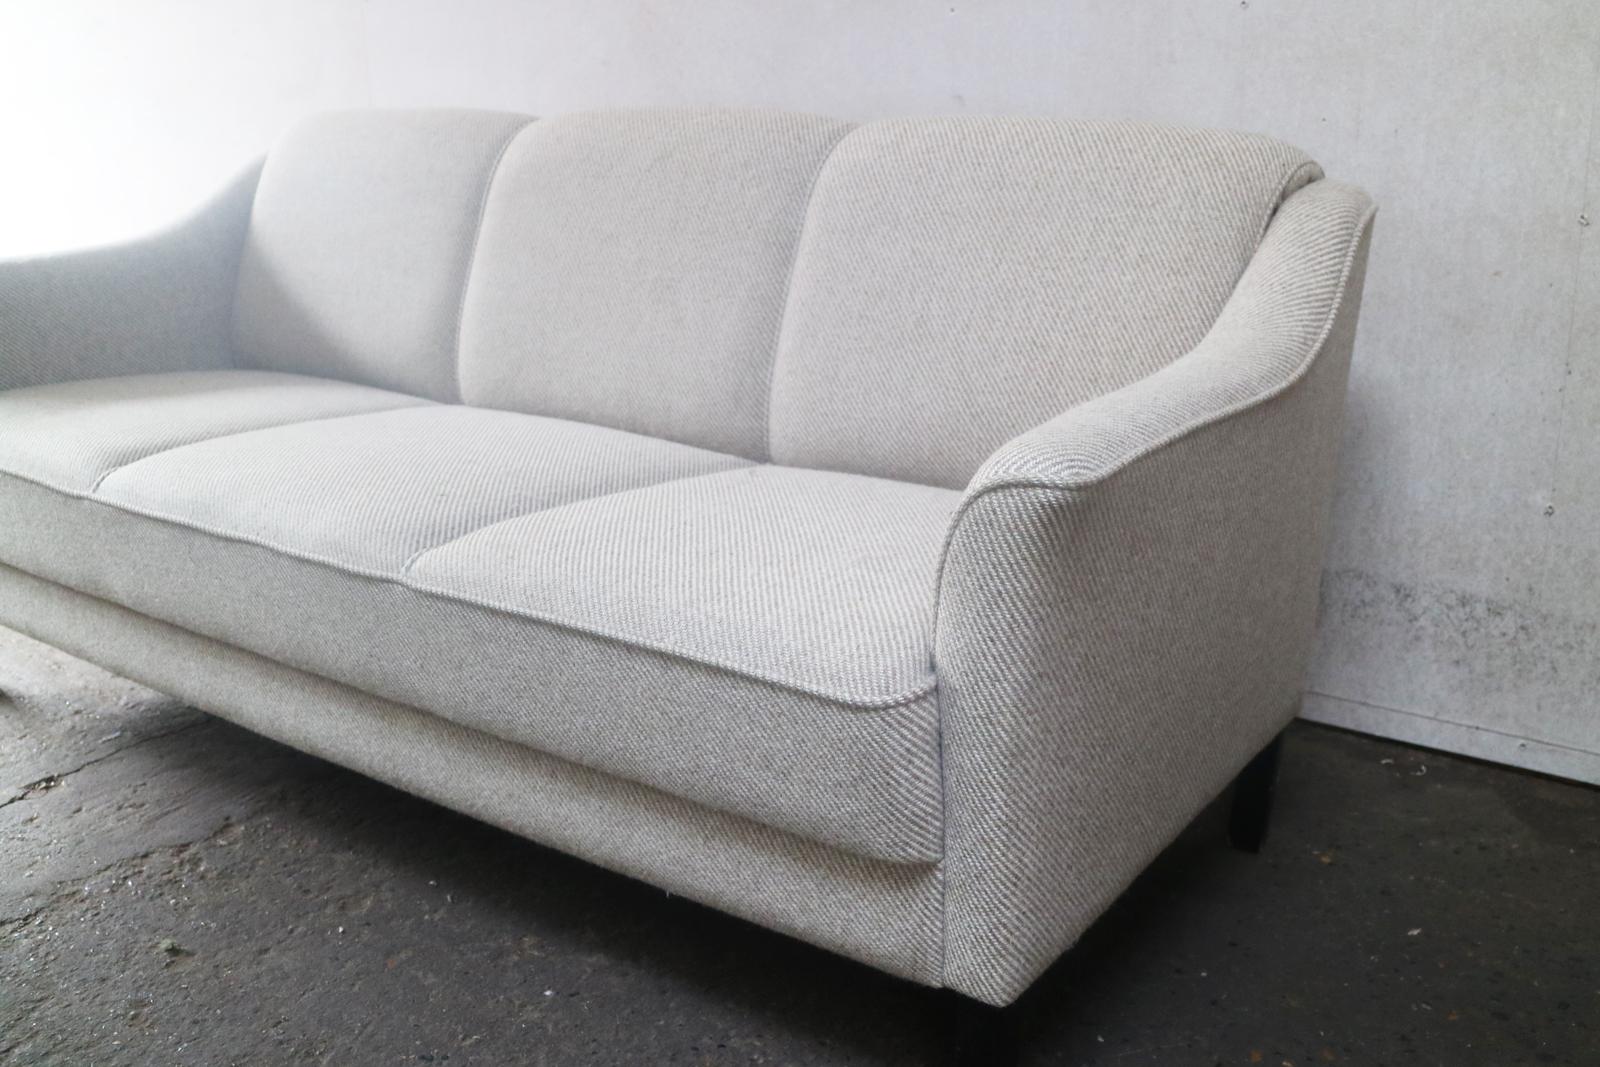 1970s Danish Midcentury Sofa with Original Wool Upholstery In Excellent Condition For Sale In London, GB